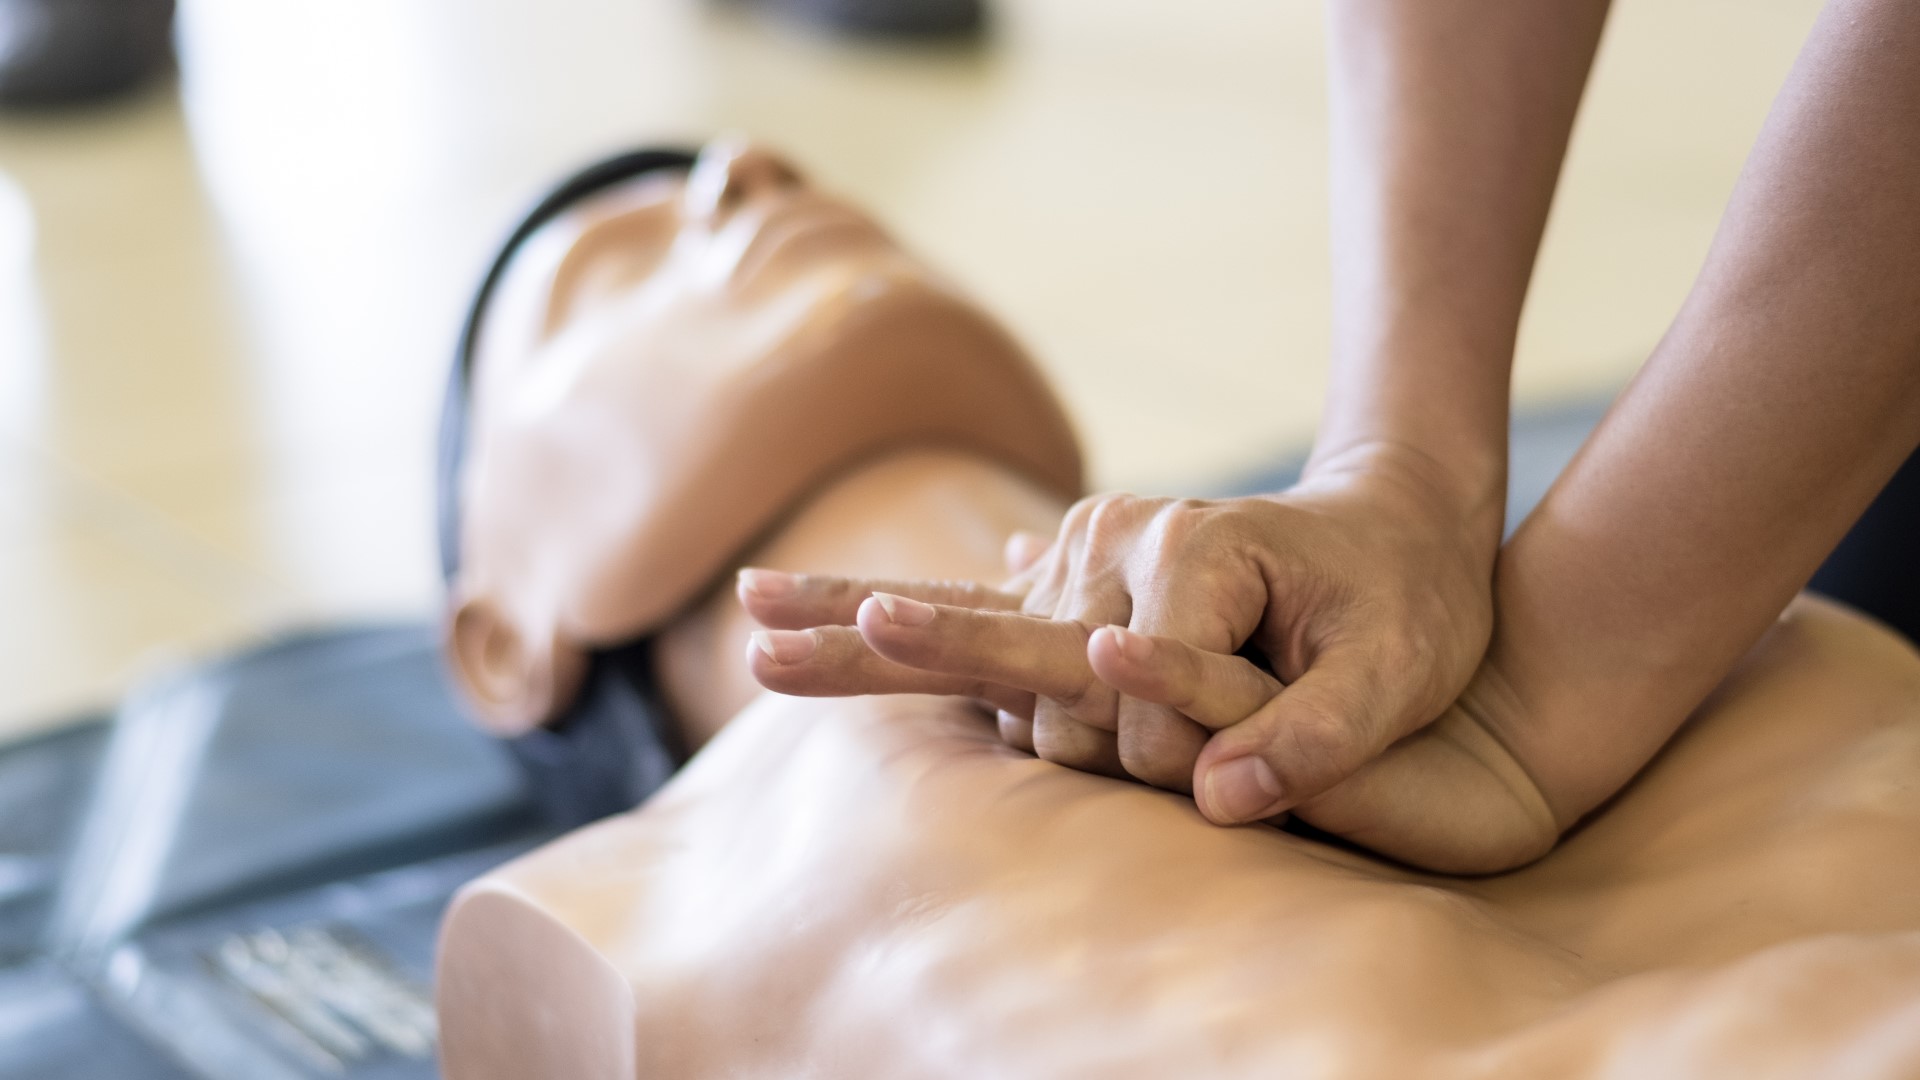 CPR training gives you the skills and confidence to help save a life.